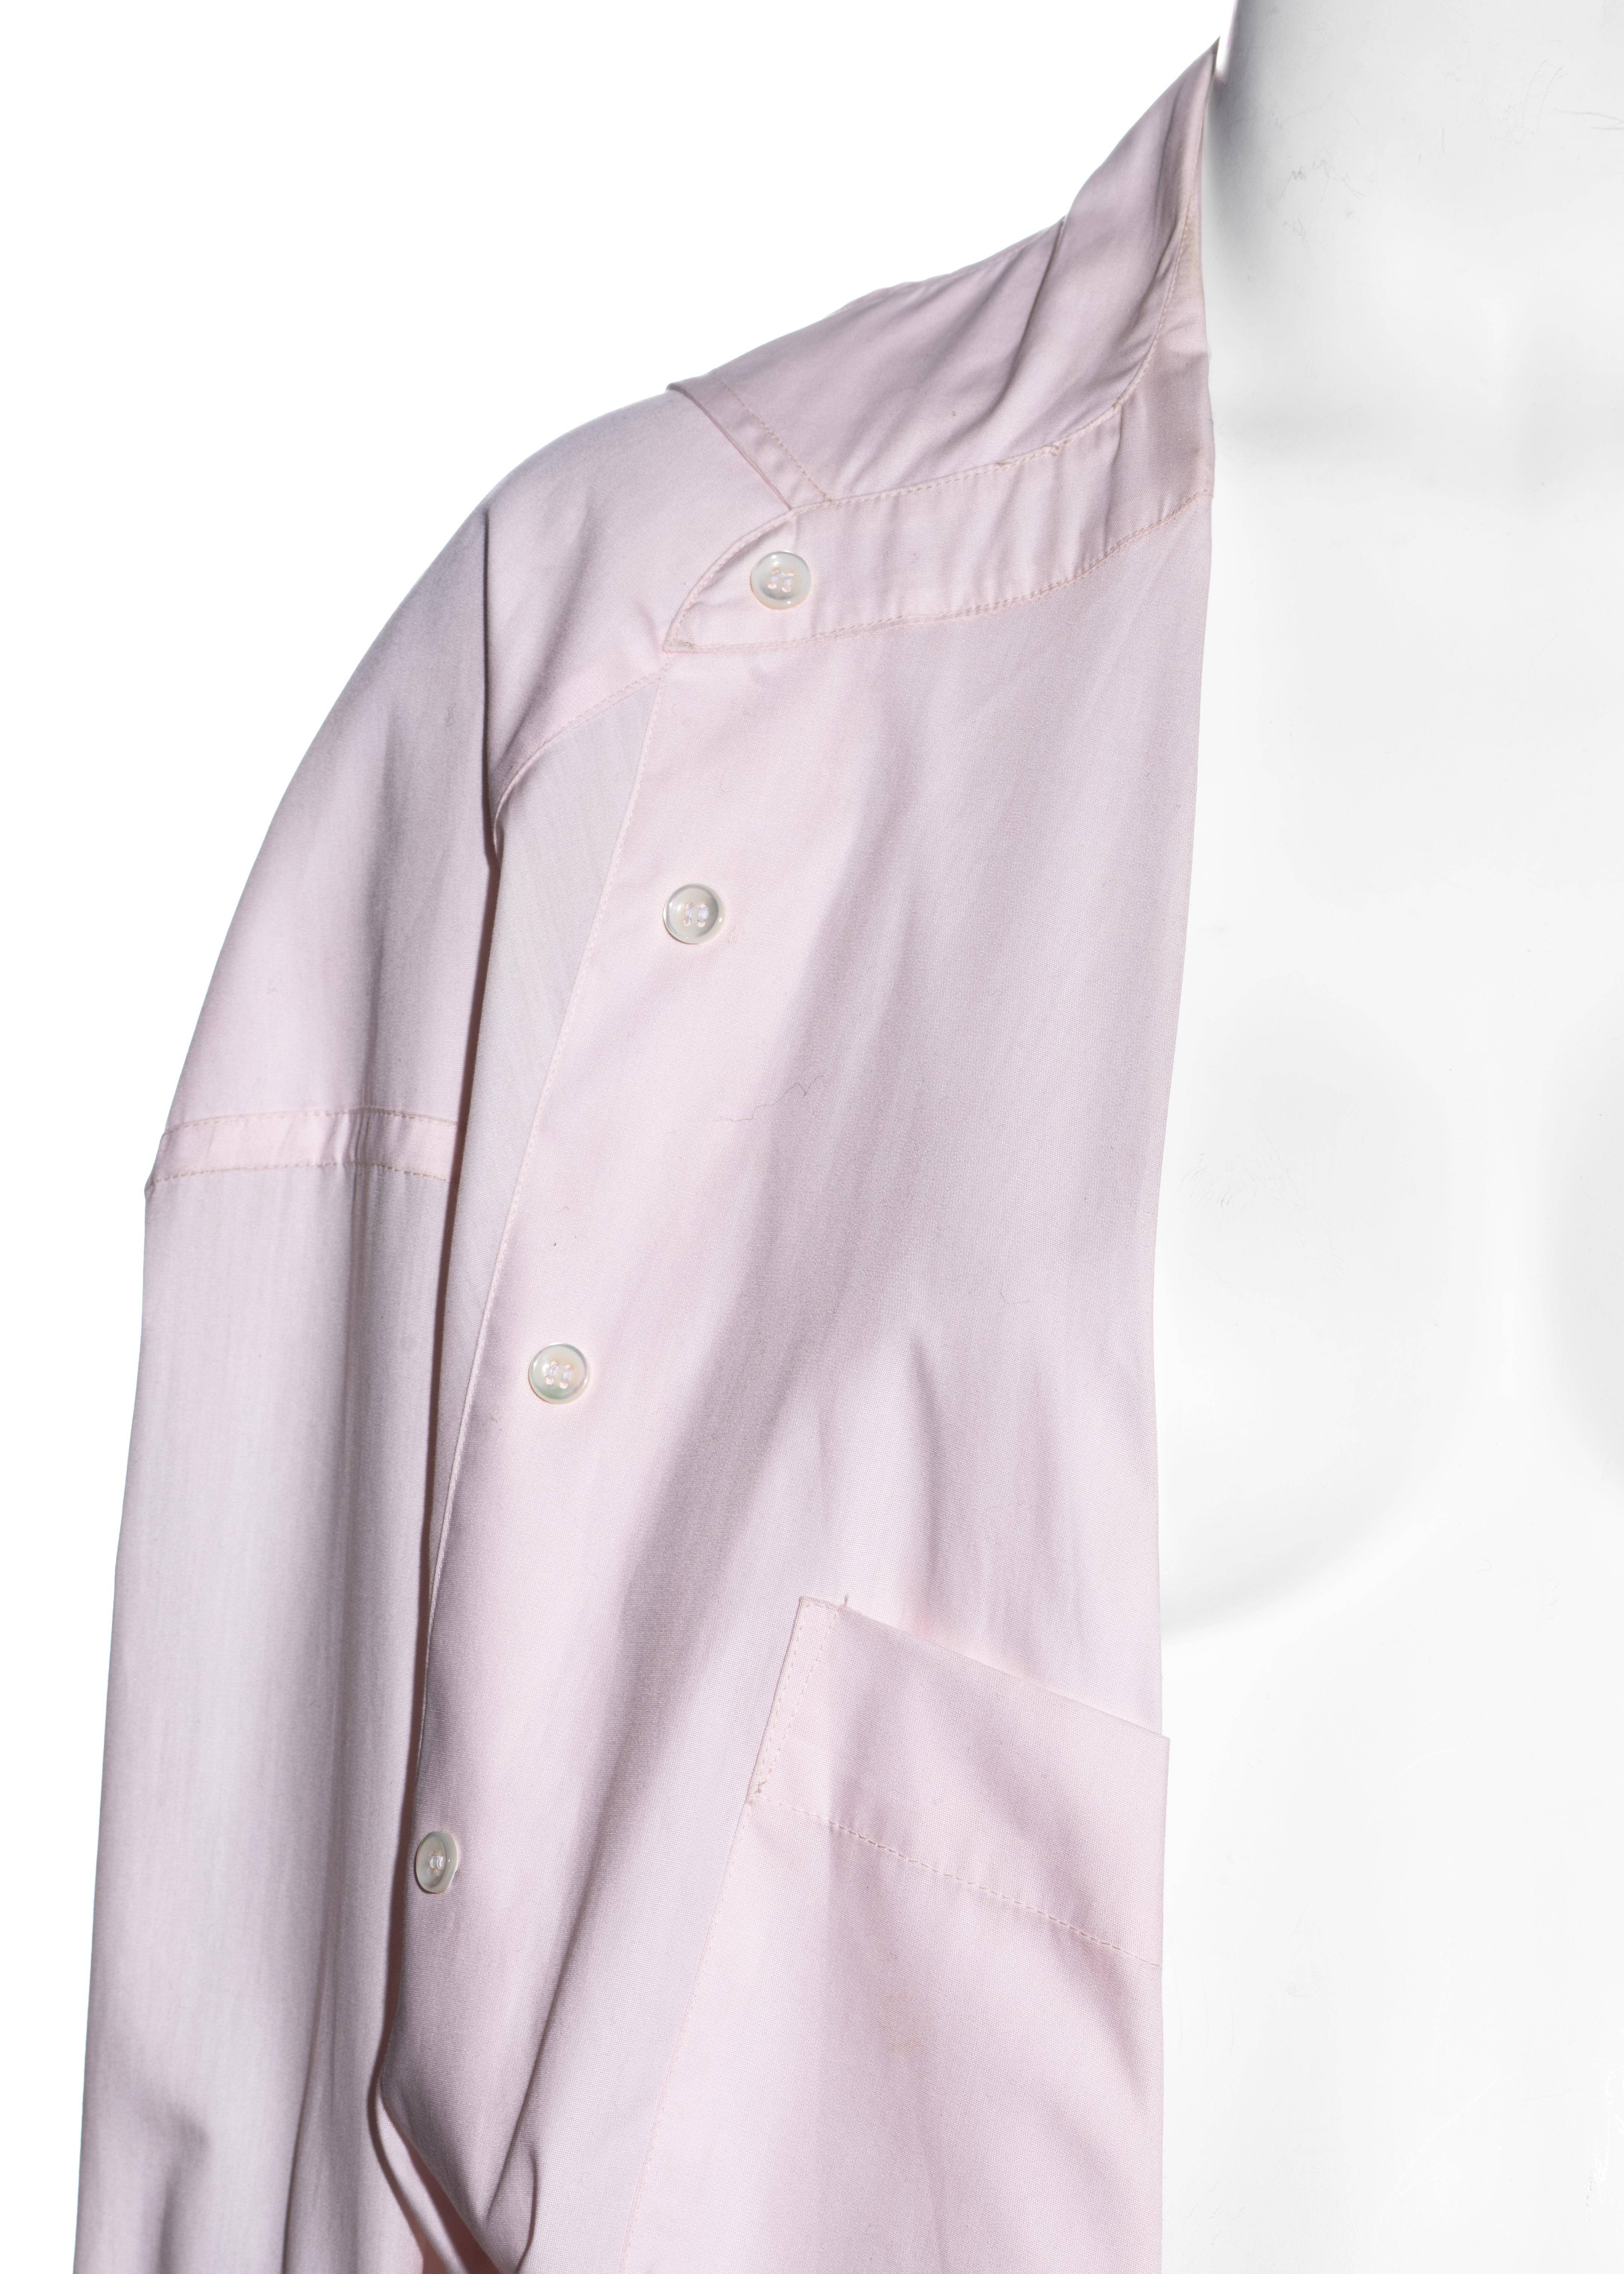 Margiela pink cotton oversized deconstructed folded shirt, ss 2001 For Sale 1